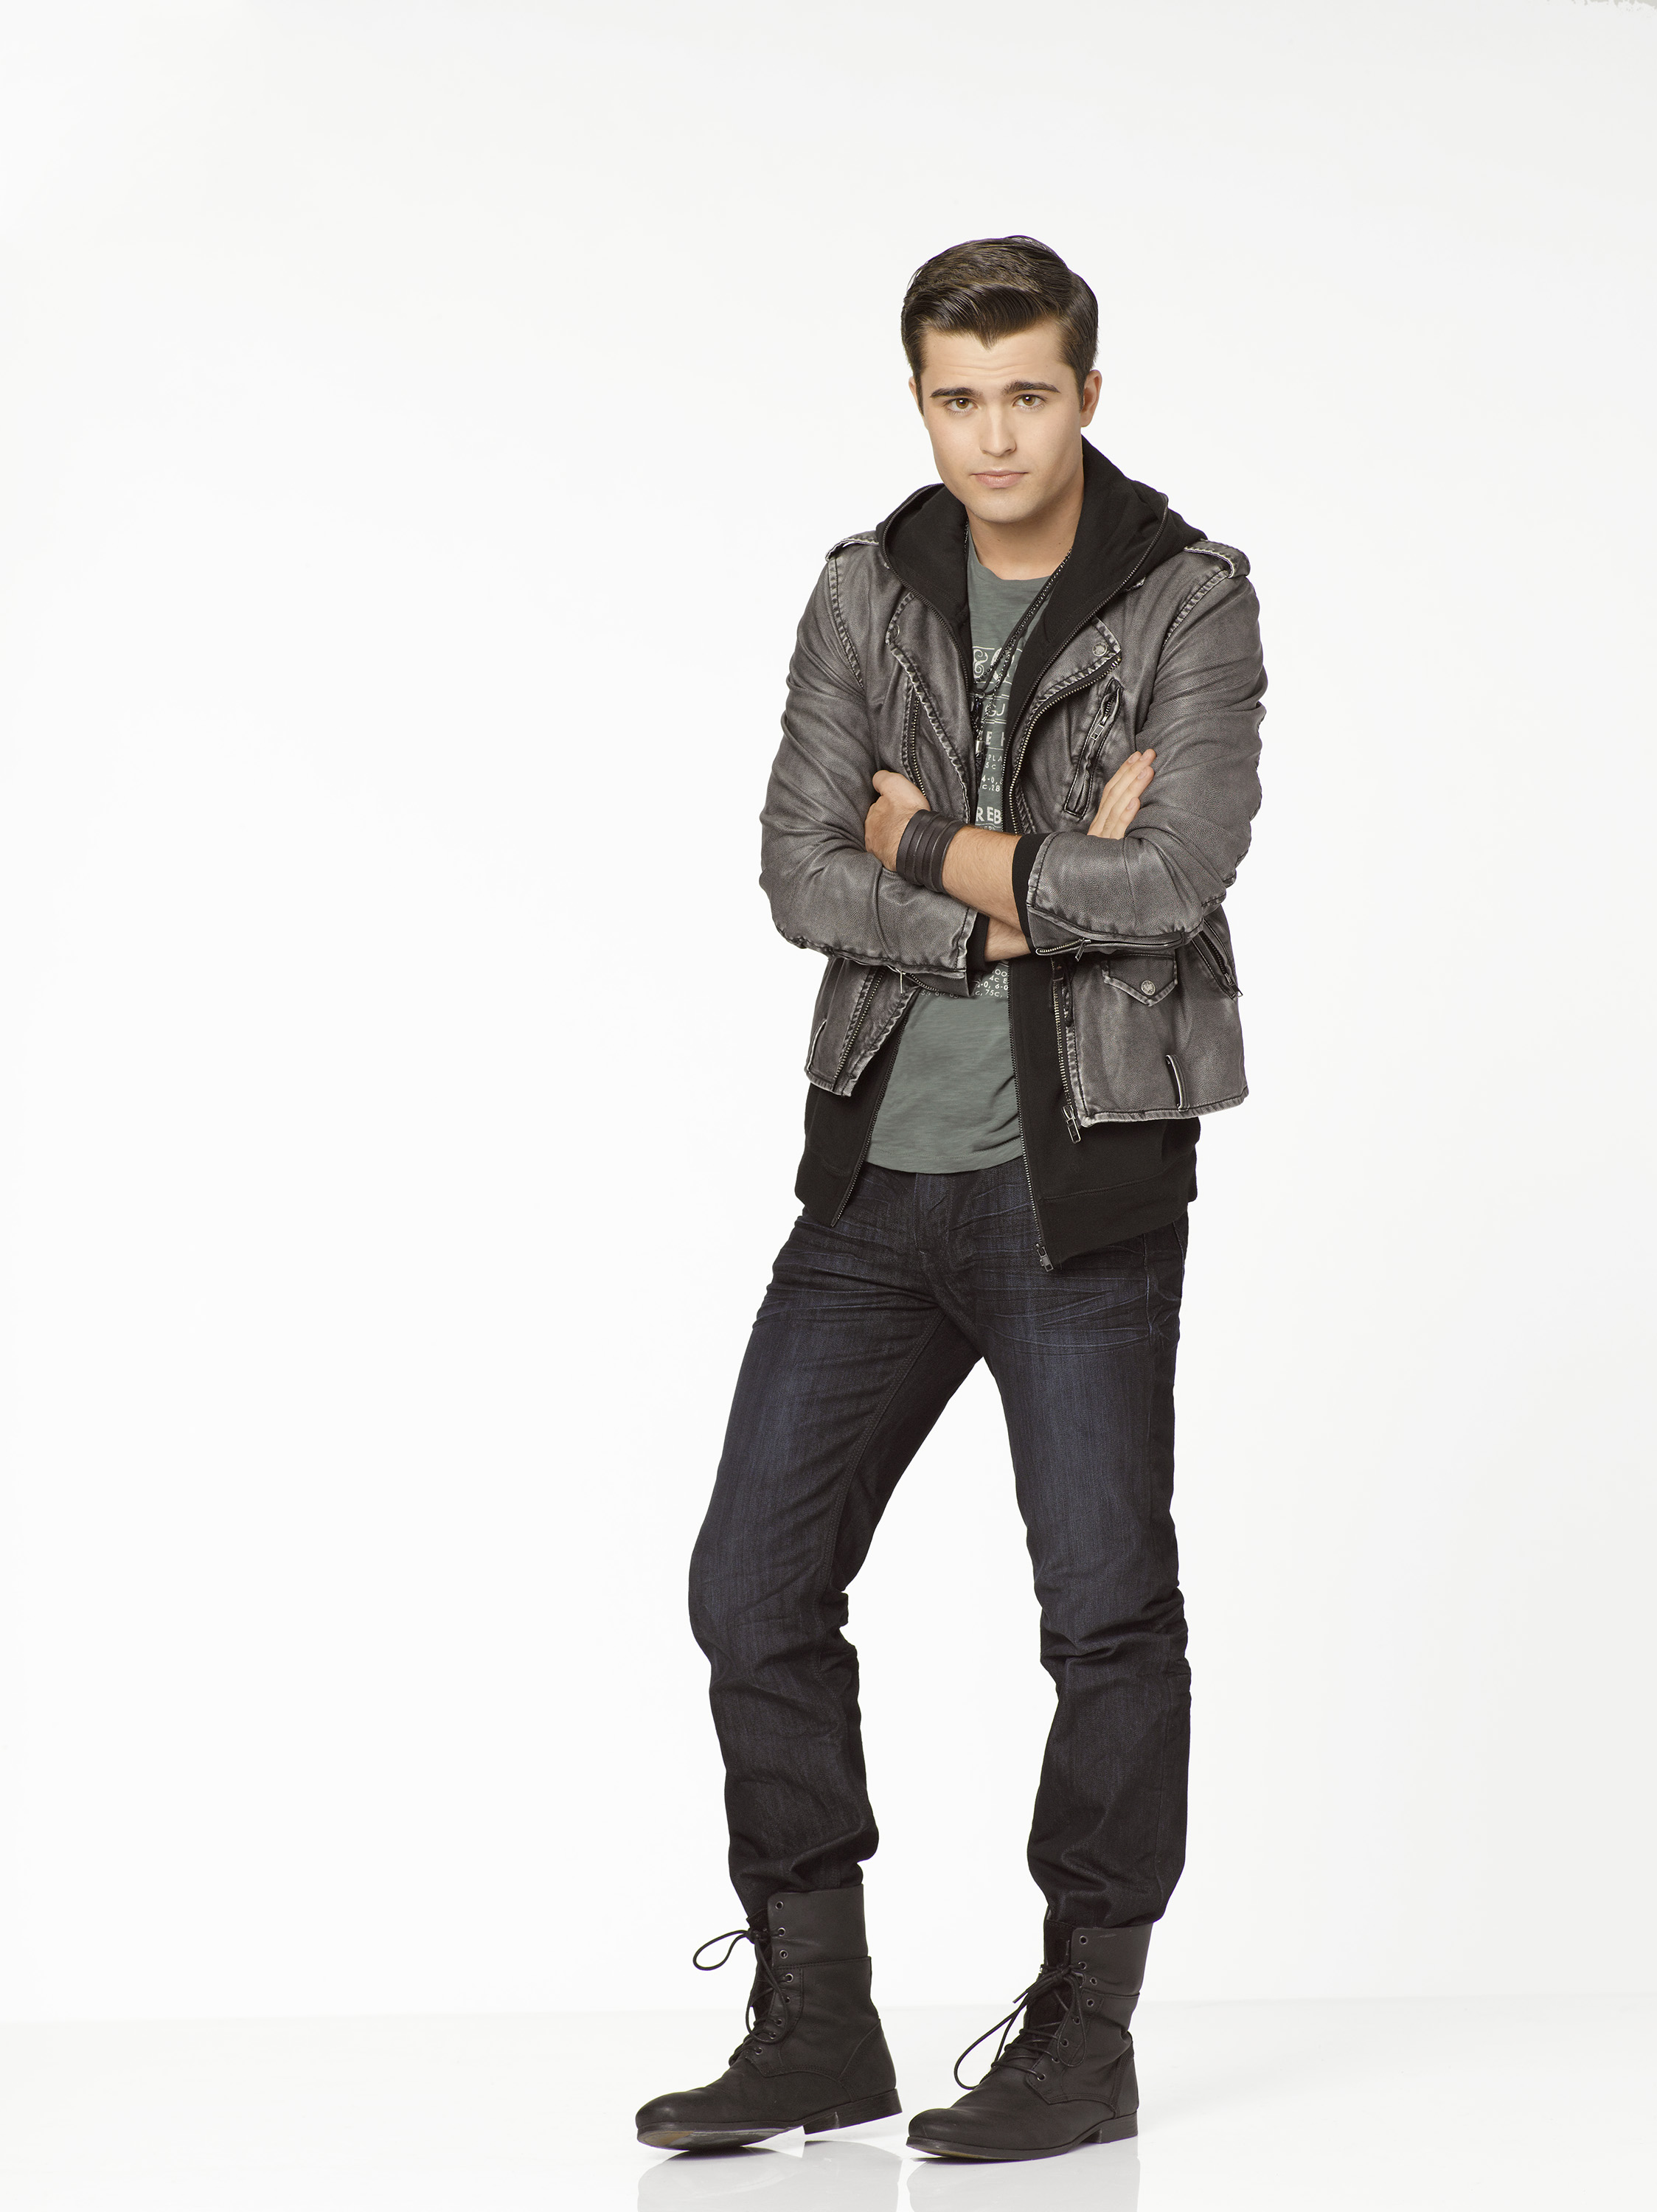 Spencer Boldman discusses Family Channel’s new movie Zapped « Celebrity Gossip and ...